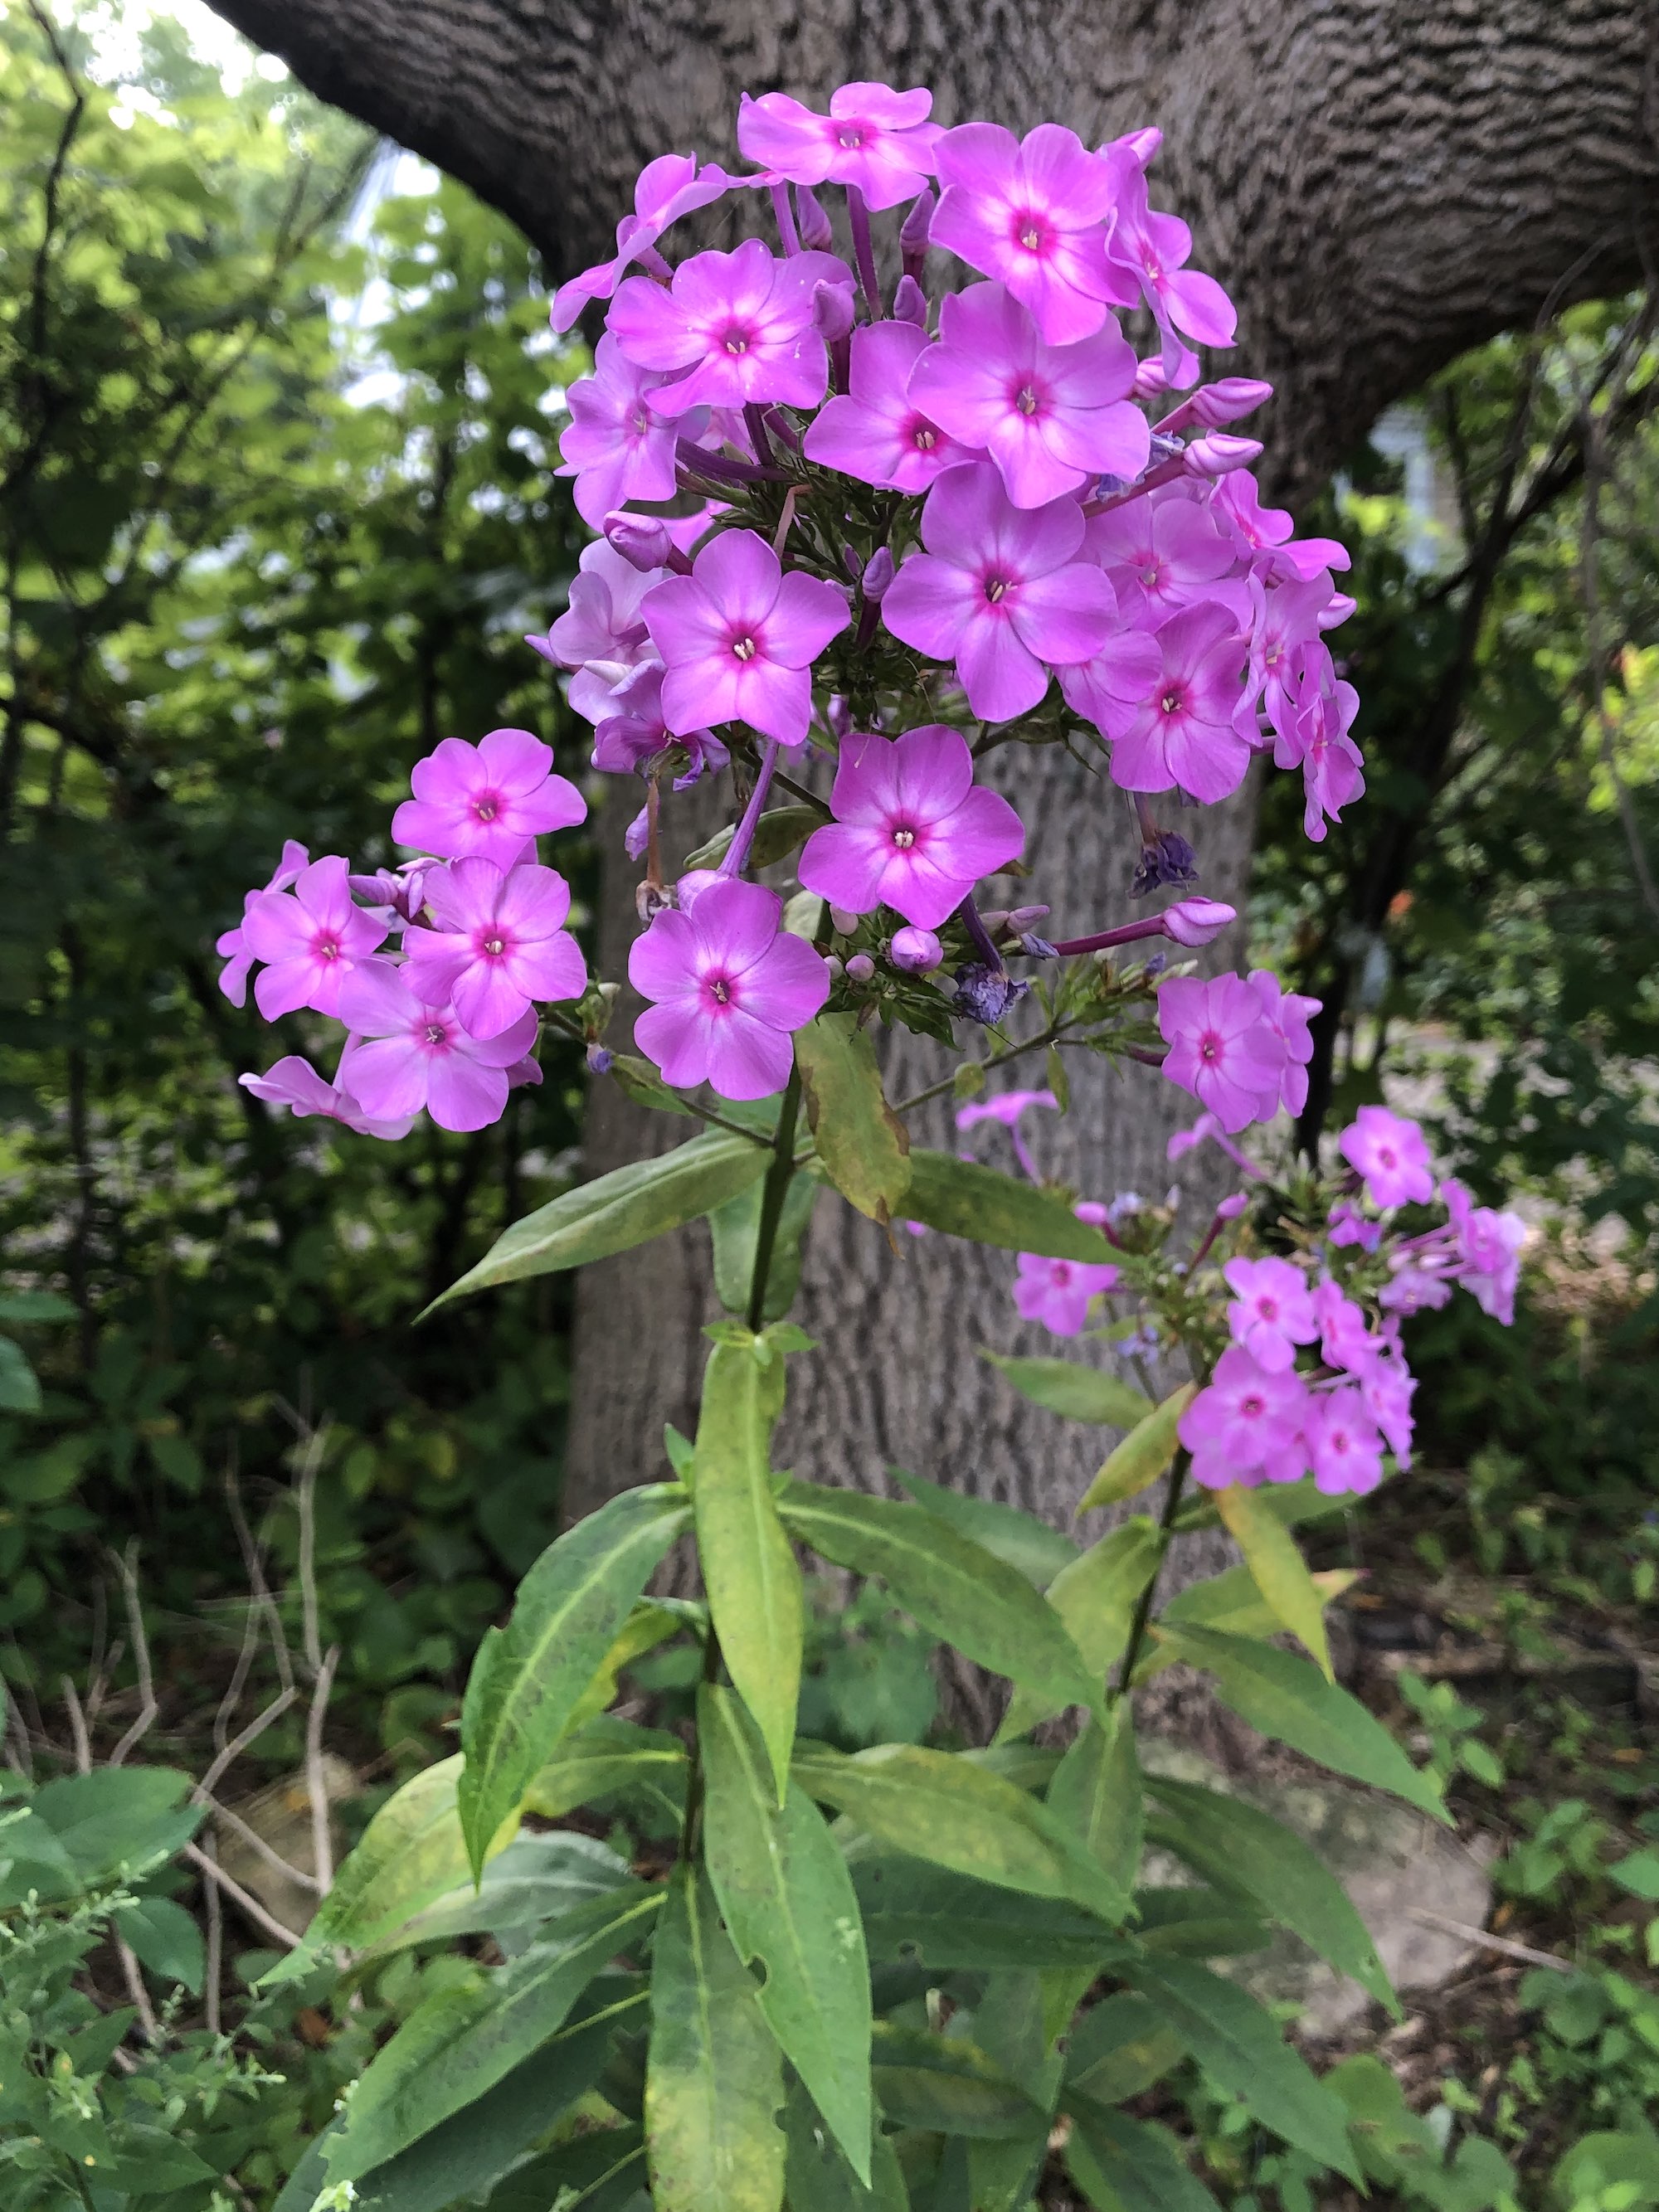 Tall Garden Phlox by Duck Pond on August 1, 2020.